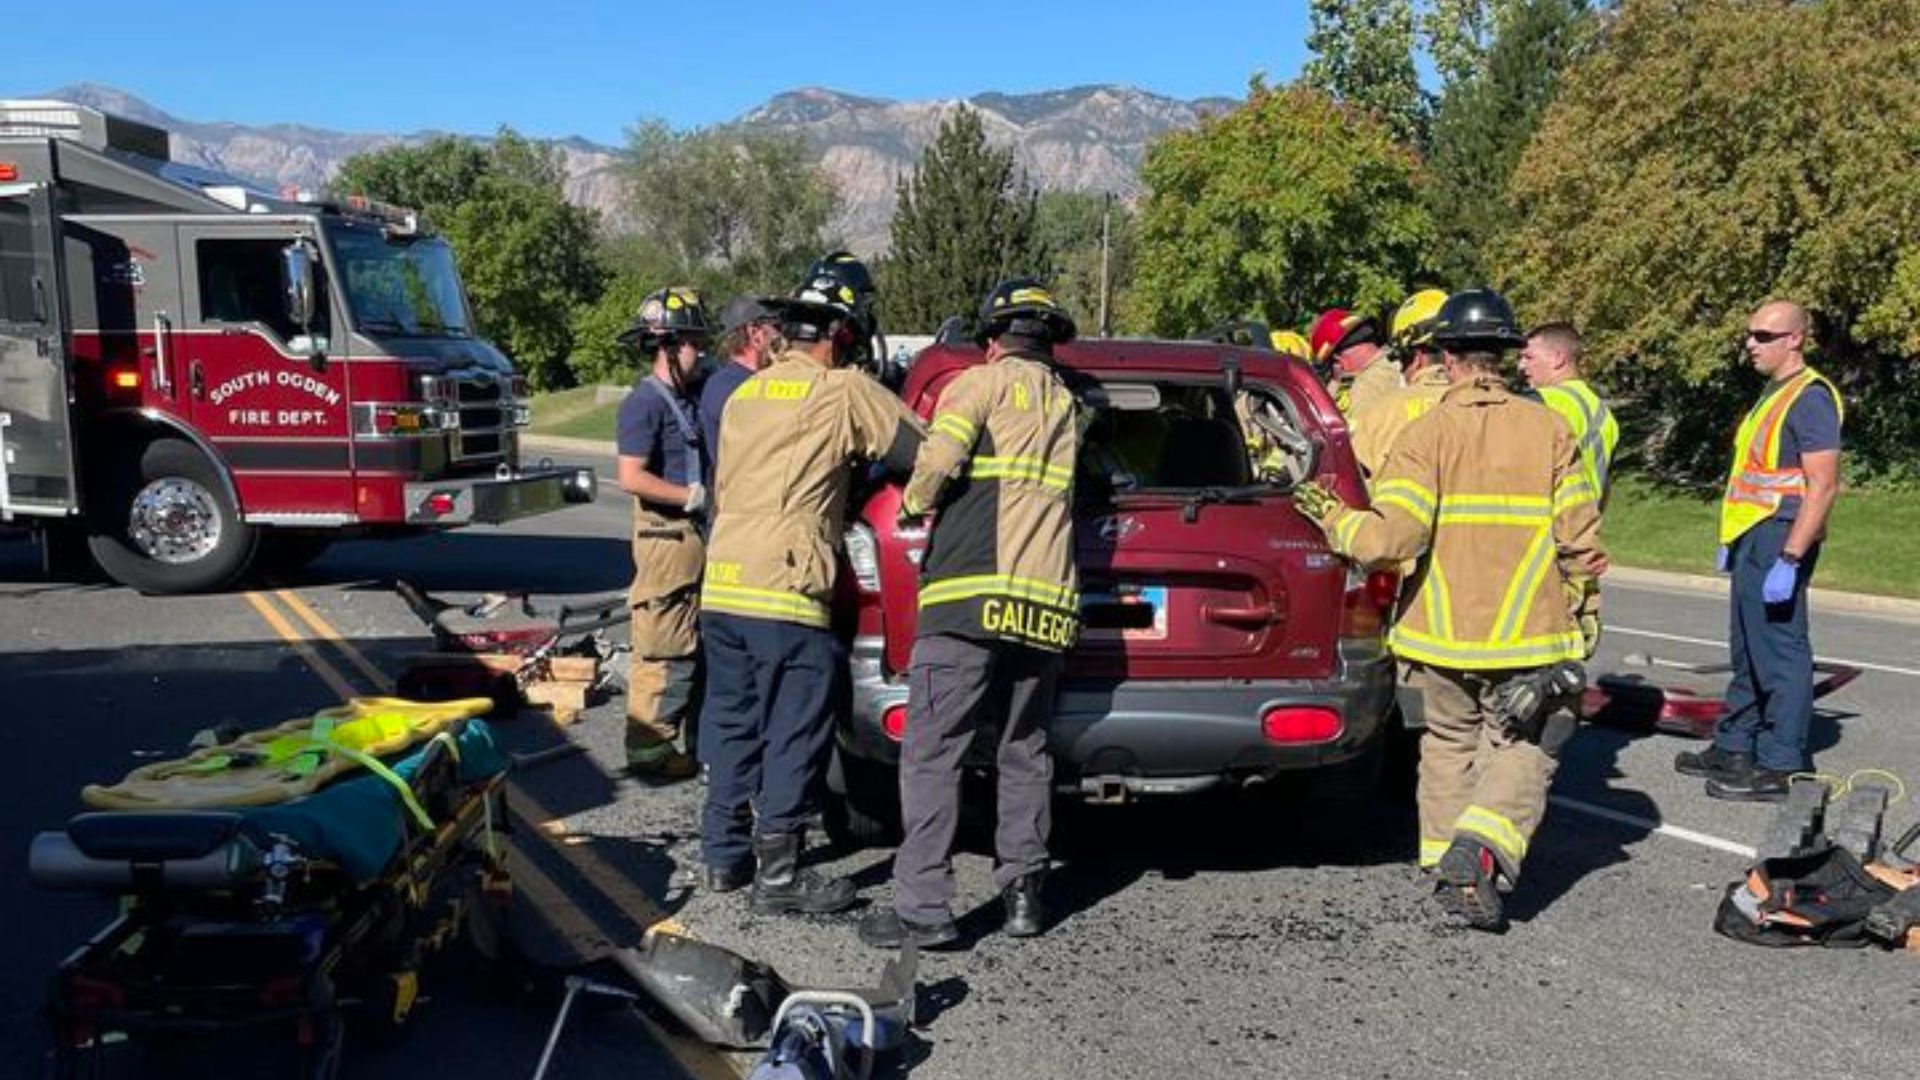  South Ogden crash requires extrication, sends 1 to hospital with serious injuries 